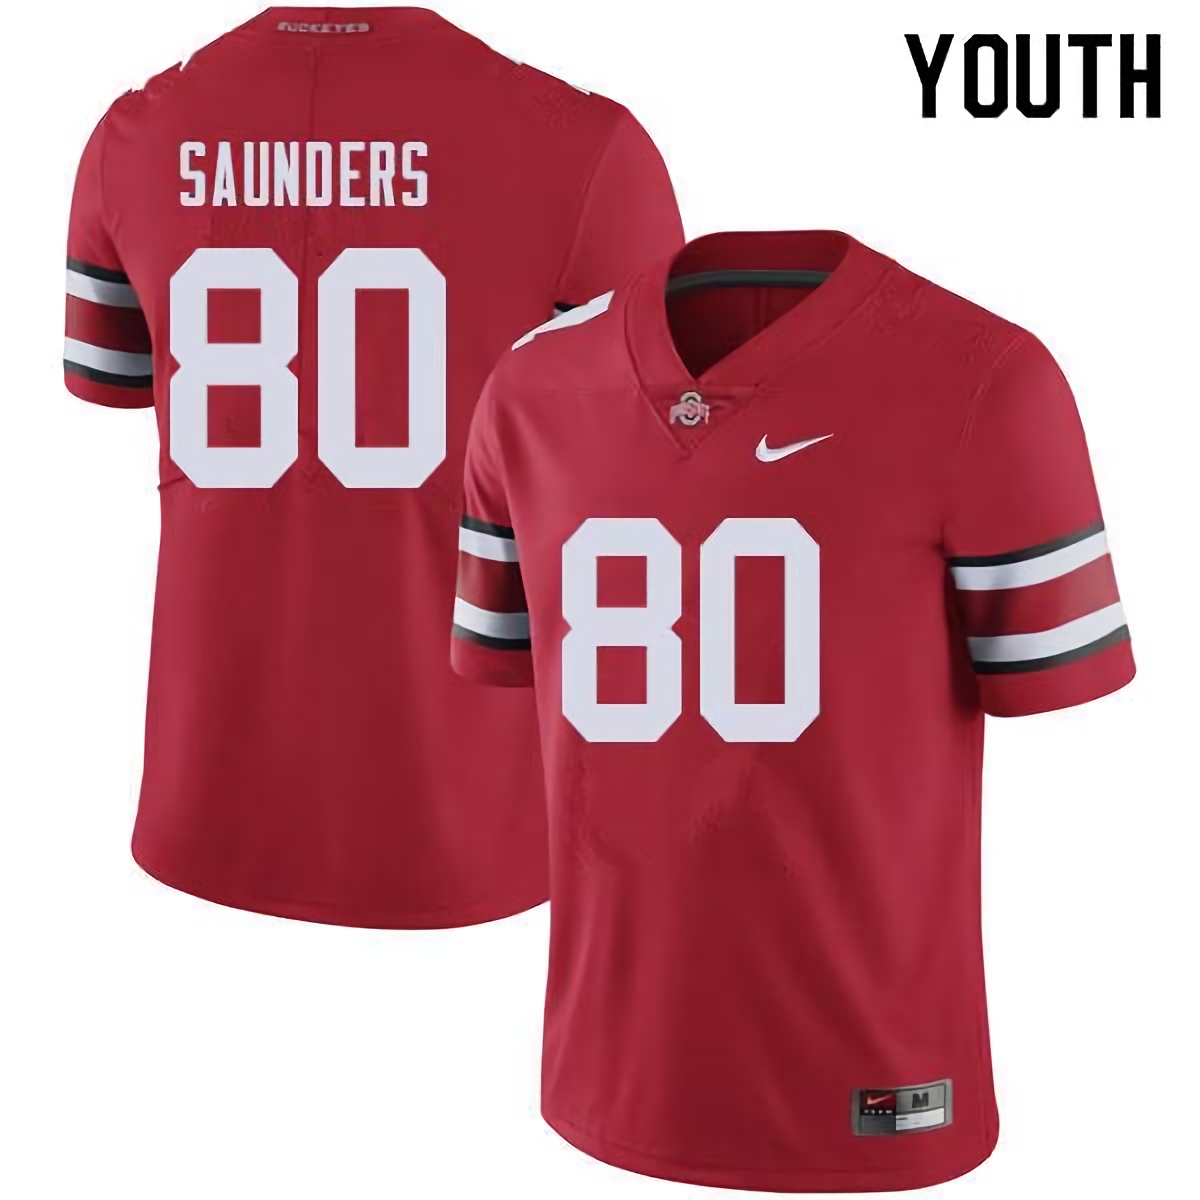 C.J. Saunders Ohio State Buckeyes Youth NCAA #80 Nike Red College Stitched Football Jersey ZRX1756VB